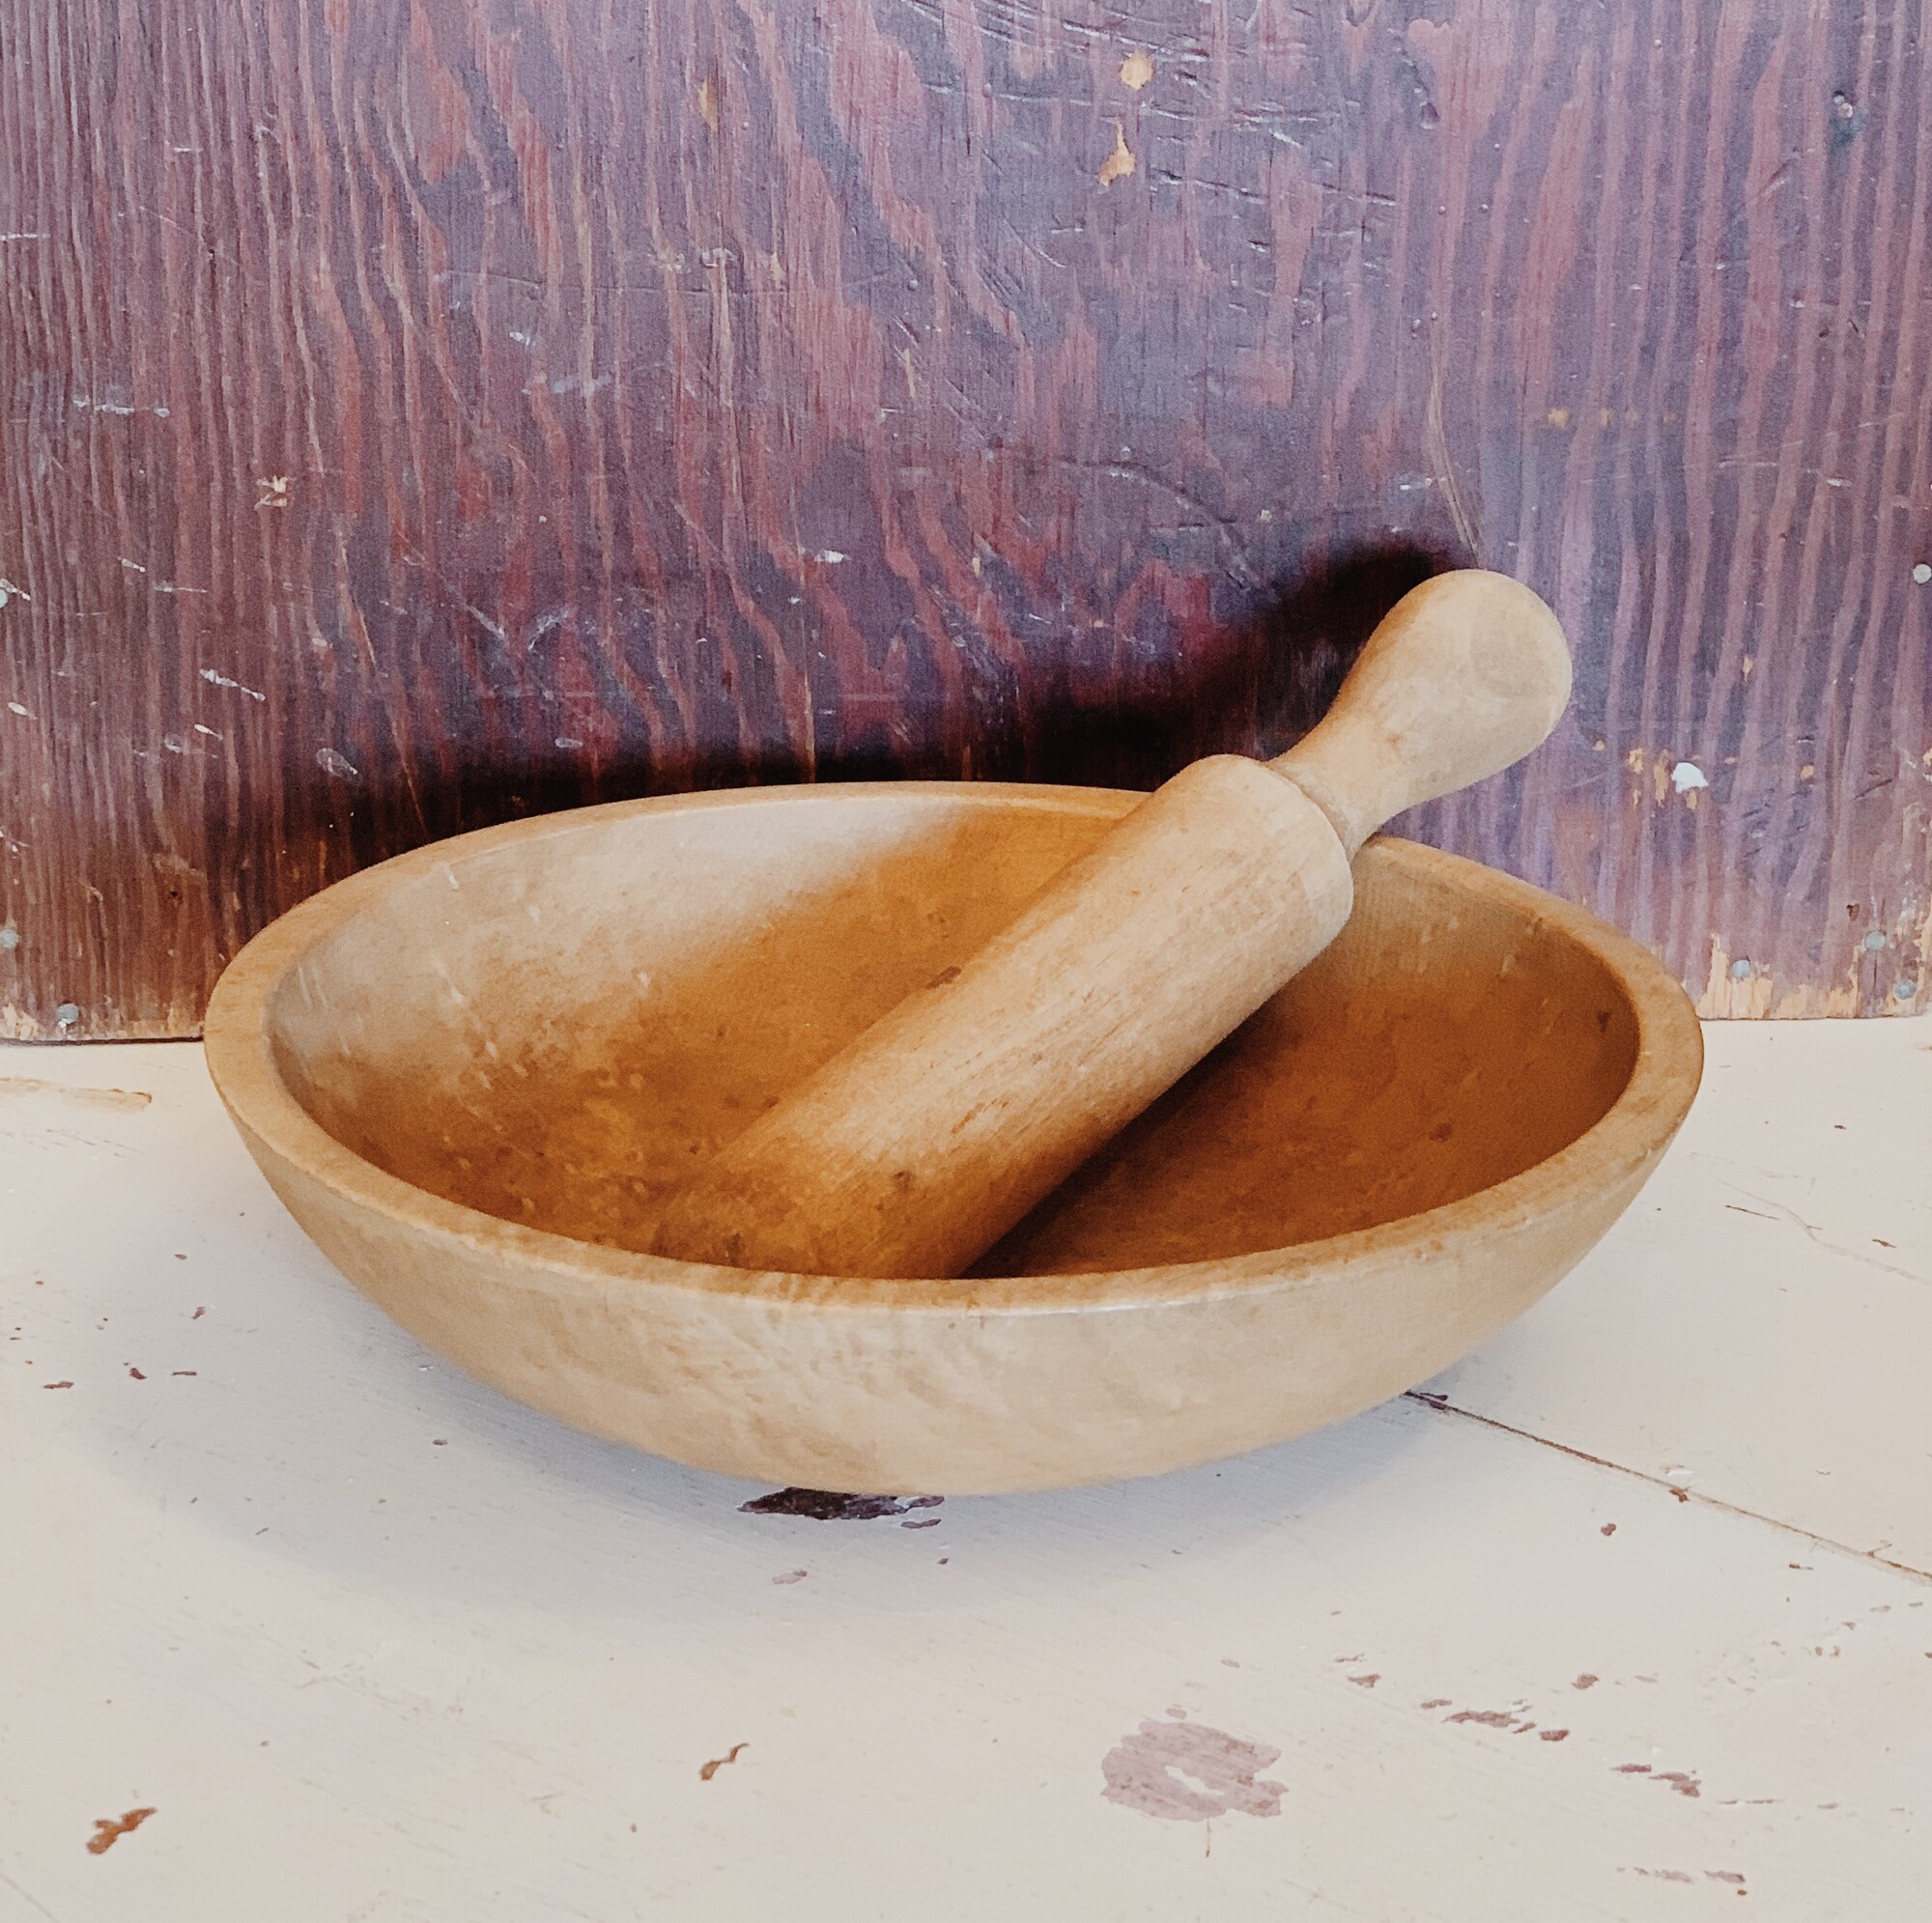 This antique wooden mortar and pestle is just amazing! A vintage or antique mortar and pestle set is breathtaking as counter decor in a kitchen. This all wooden piece would look stunning on an island, as a dining table centerpiece, on a shelf, or in a cabinet with glass doors!

Measurements:
Mortar: 10.5 Inches x 11.5 Inches x 3 Inches
Pestle: 11 Inches x 1.75 Inches